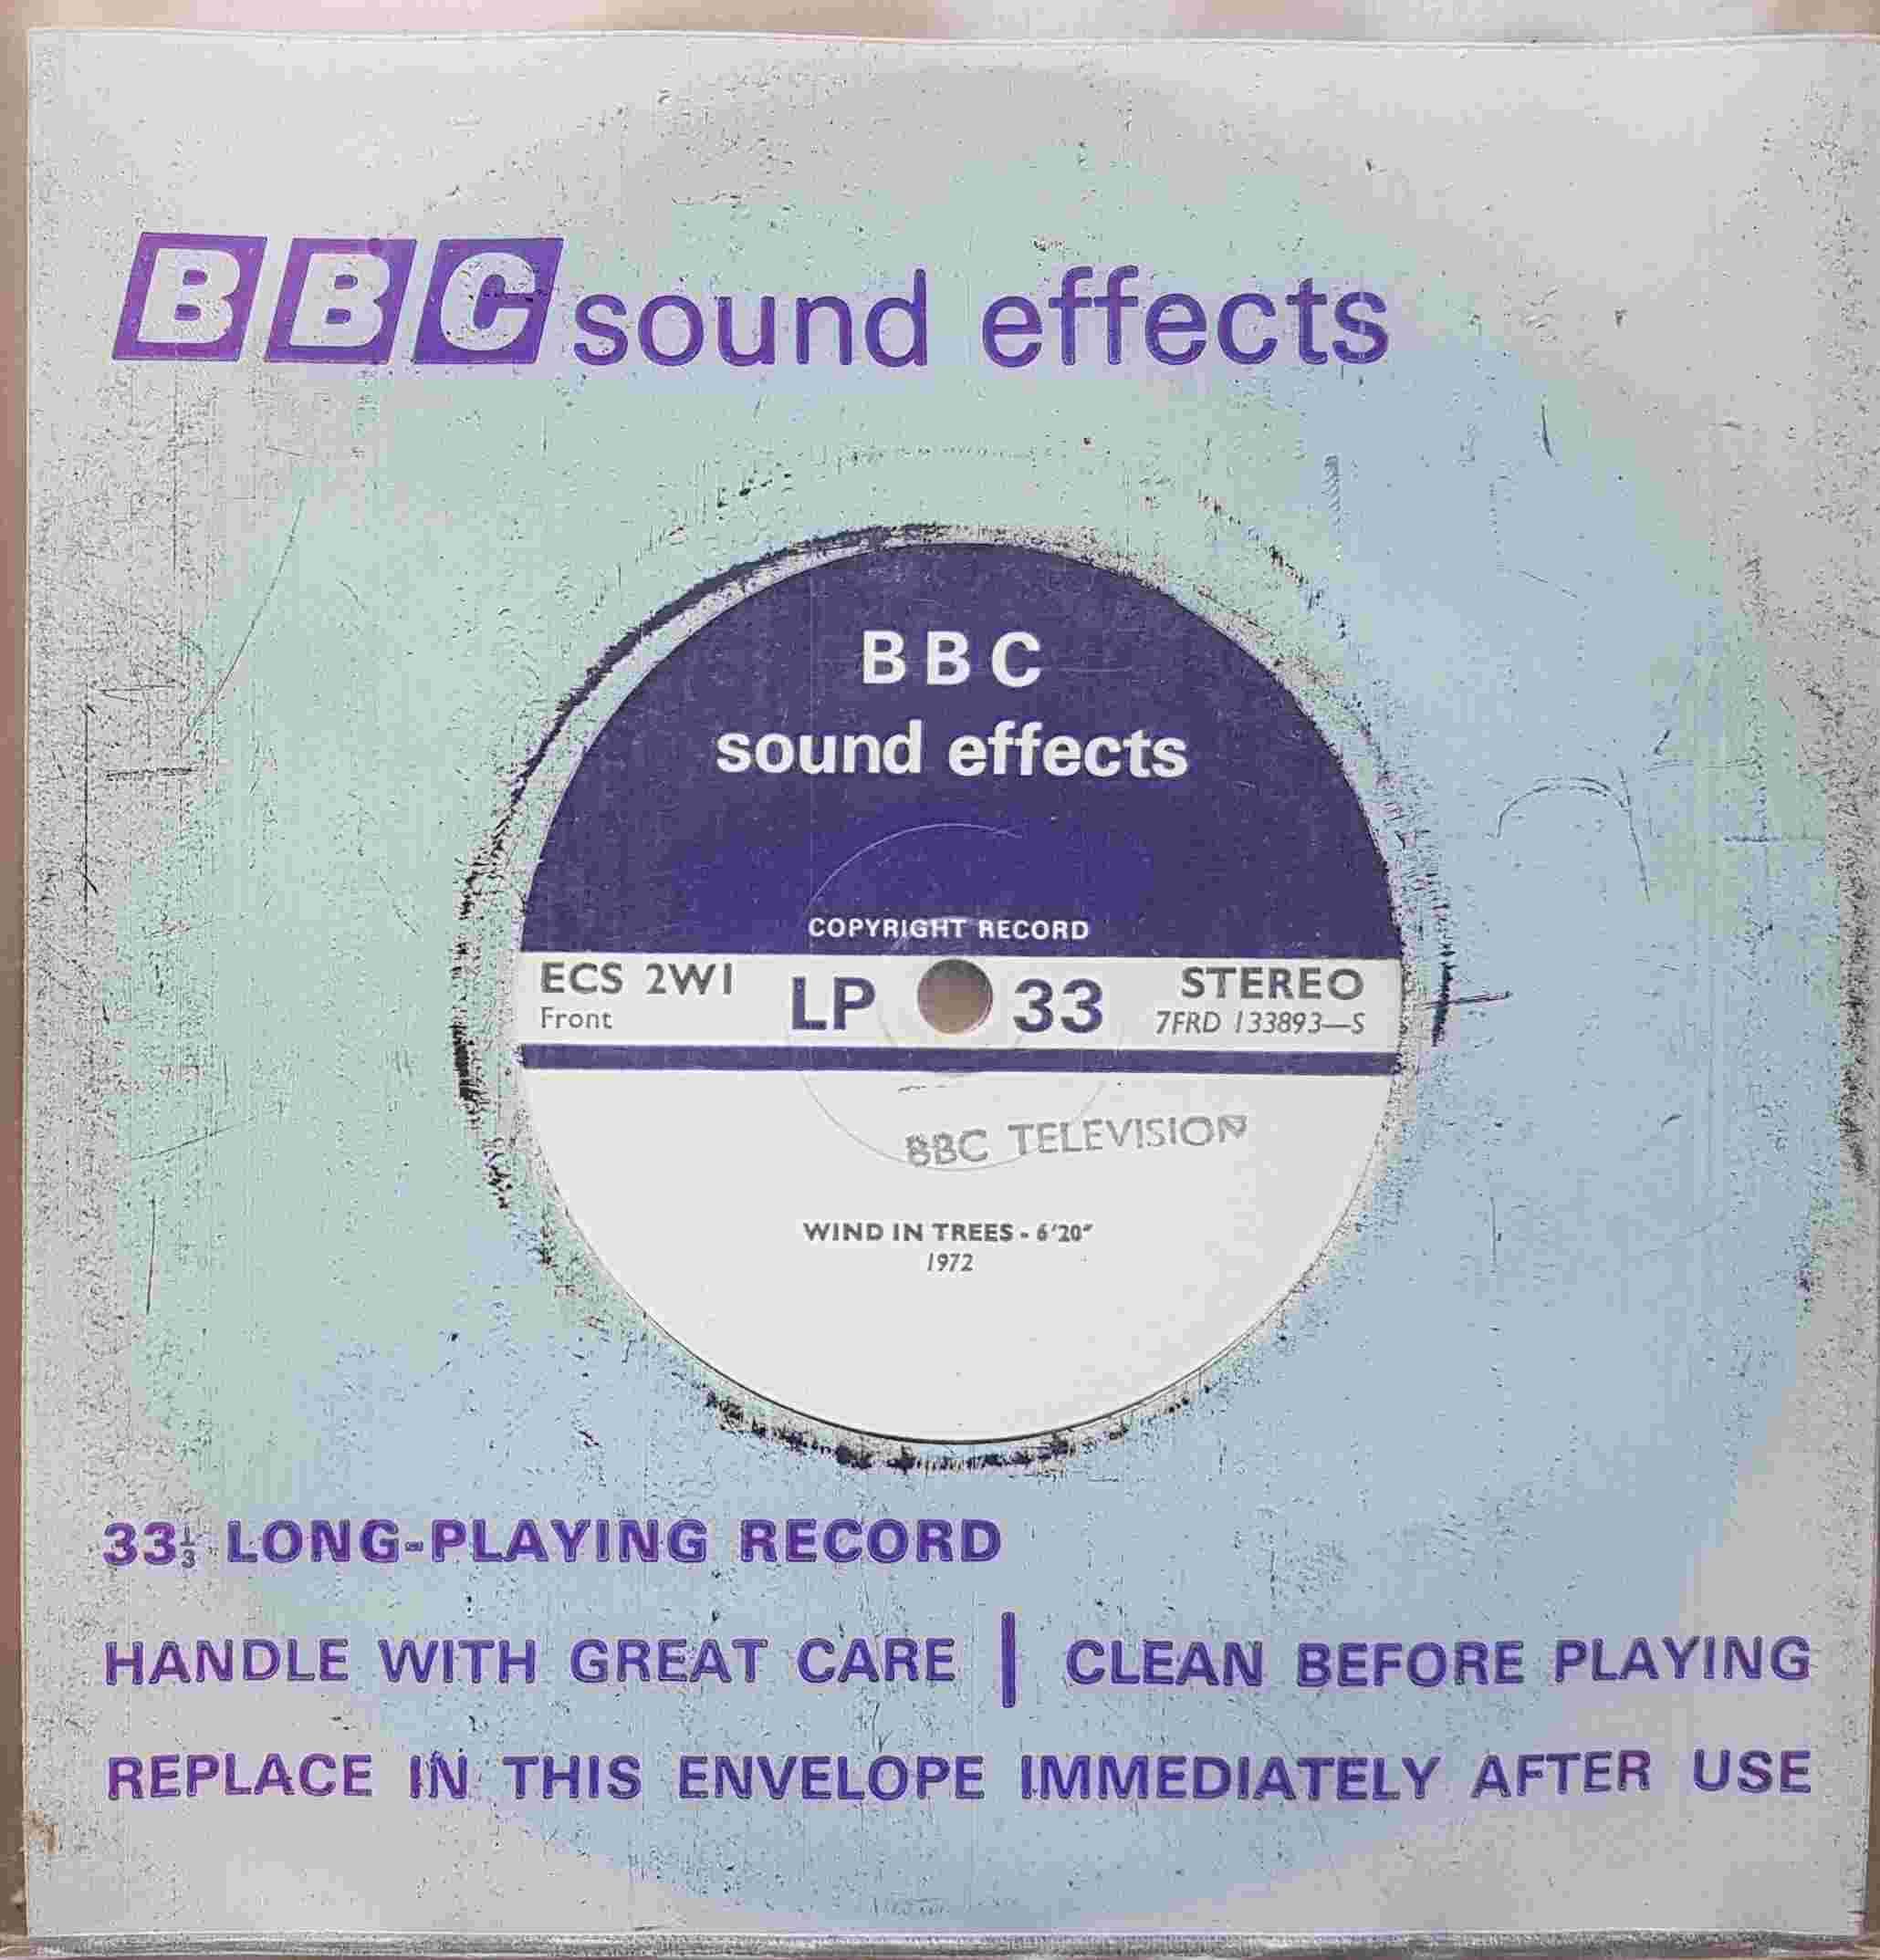 Picture of ECS 2W1 Wind in trees / Eerie wind by artist Not registered from the BBC singles - Records and Tapes library